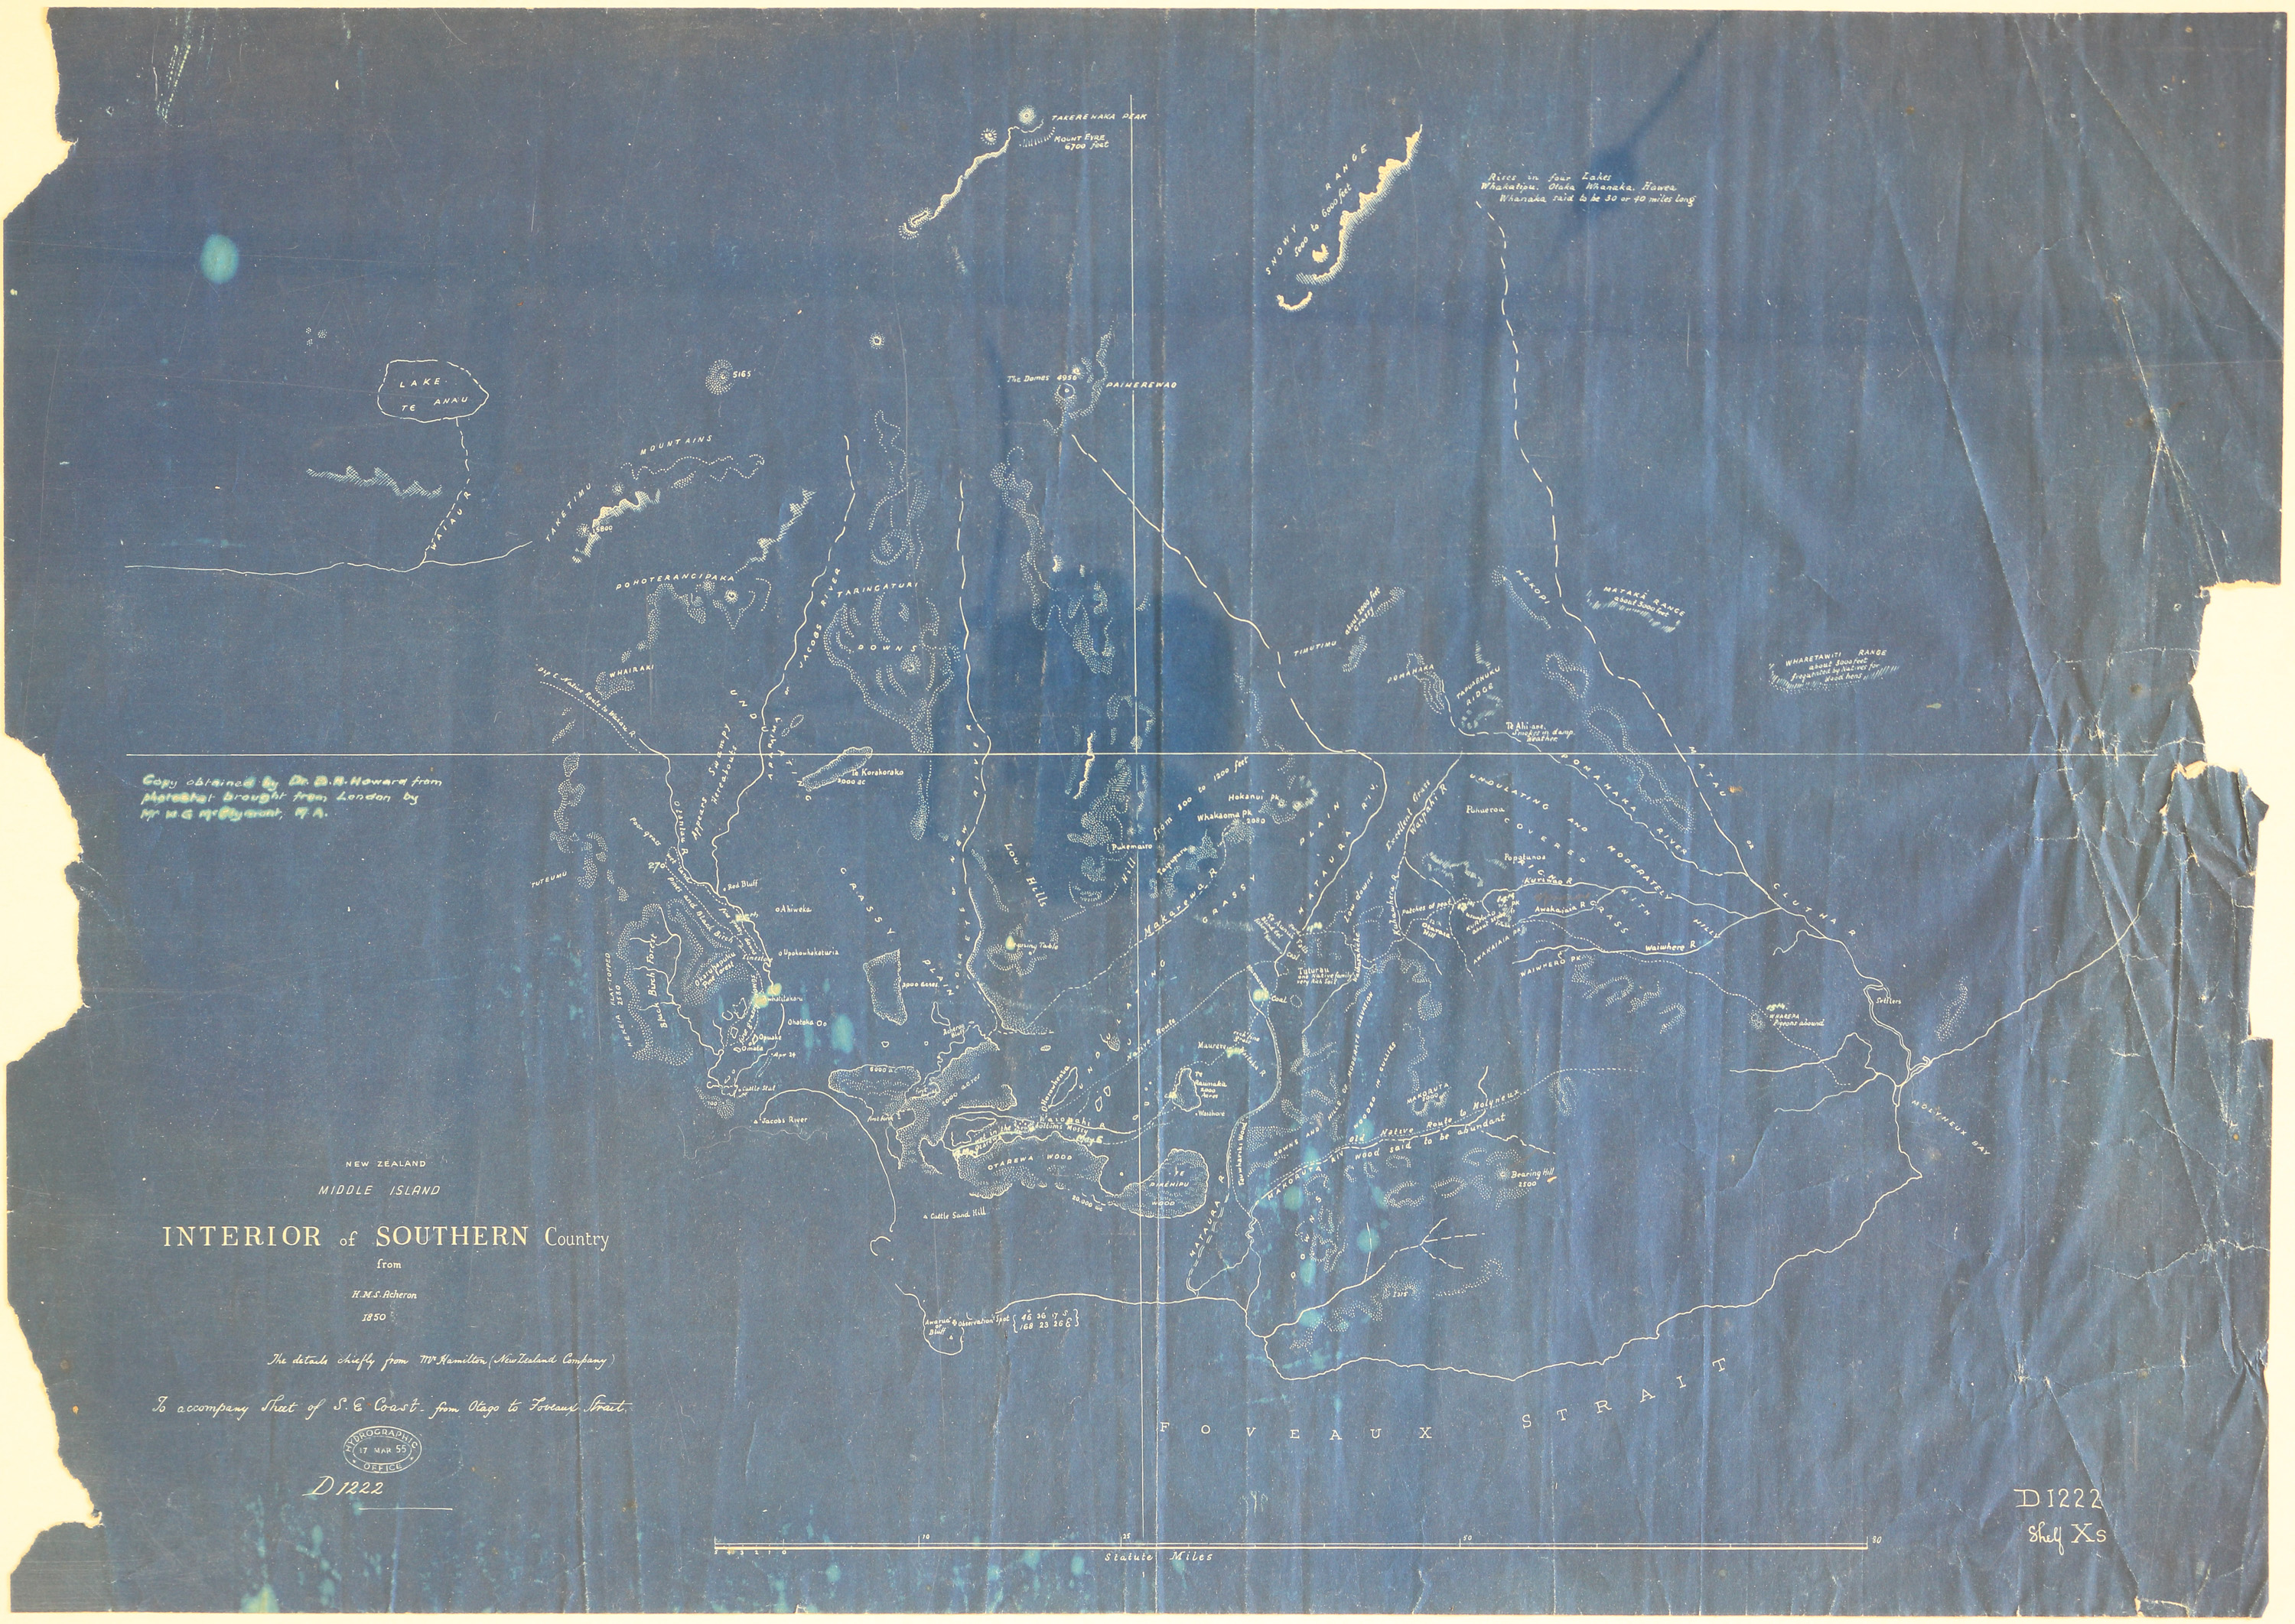 New Zealand Middle Island, Interior of Southern Country from H.M.S Acheron [copy]